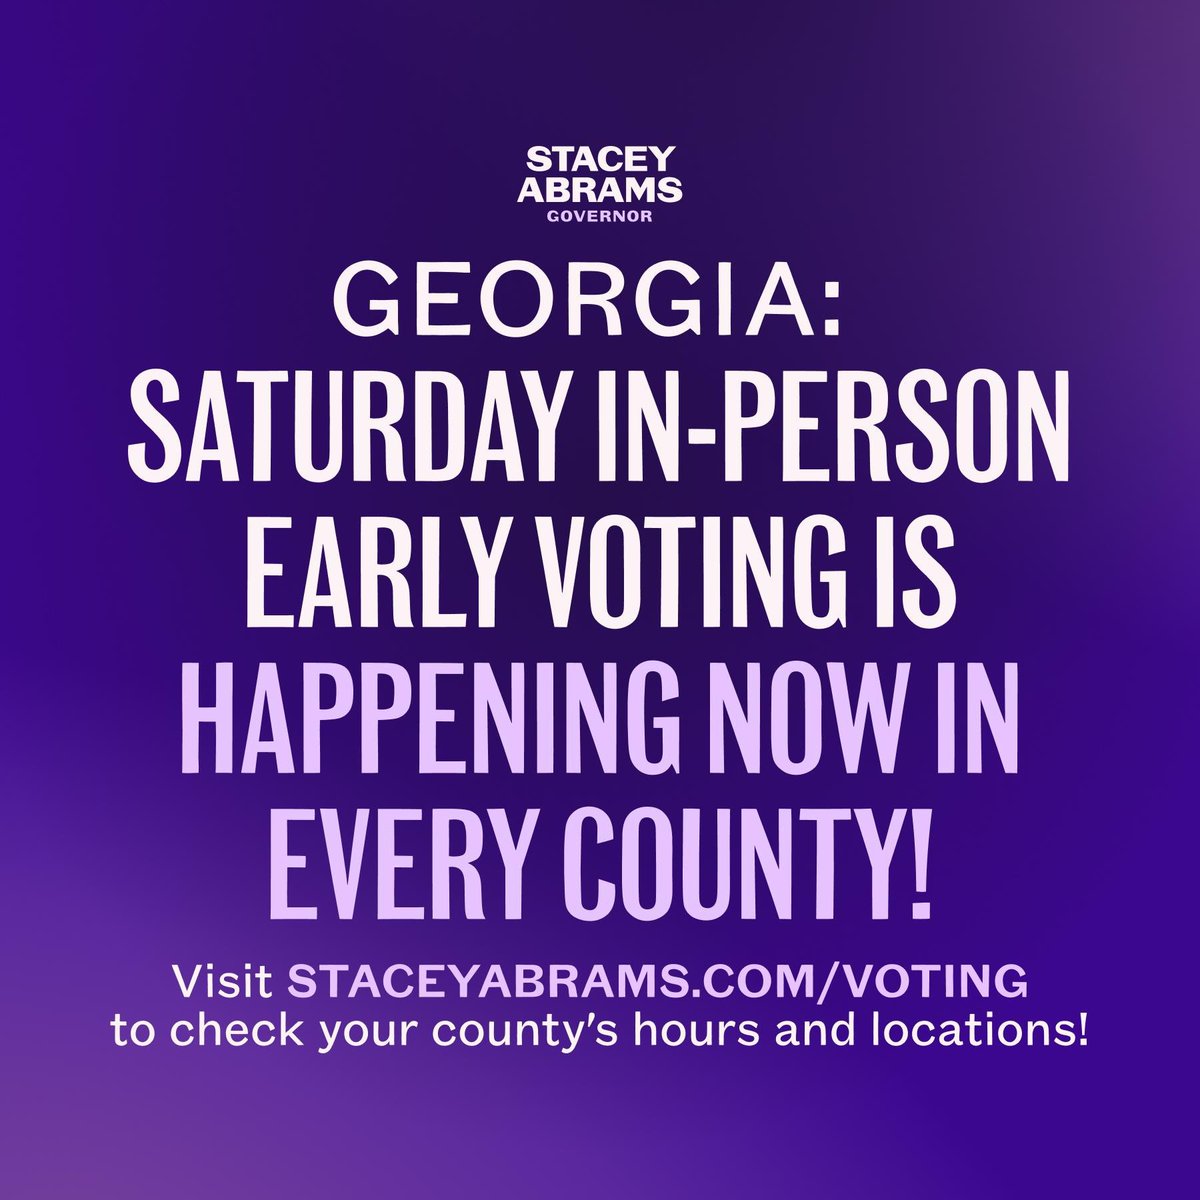 Georgia, you can vote early today! Saturday in-person Early Voting is happening now in every county, go to StaceyAbrams.com/voting to find a convenient location in your county, and then go make your voice heard!